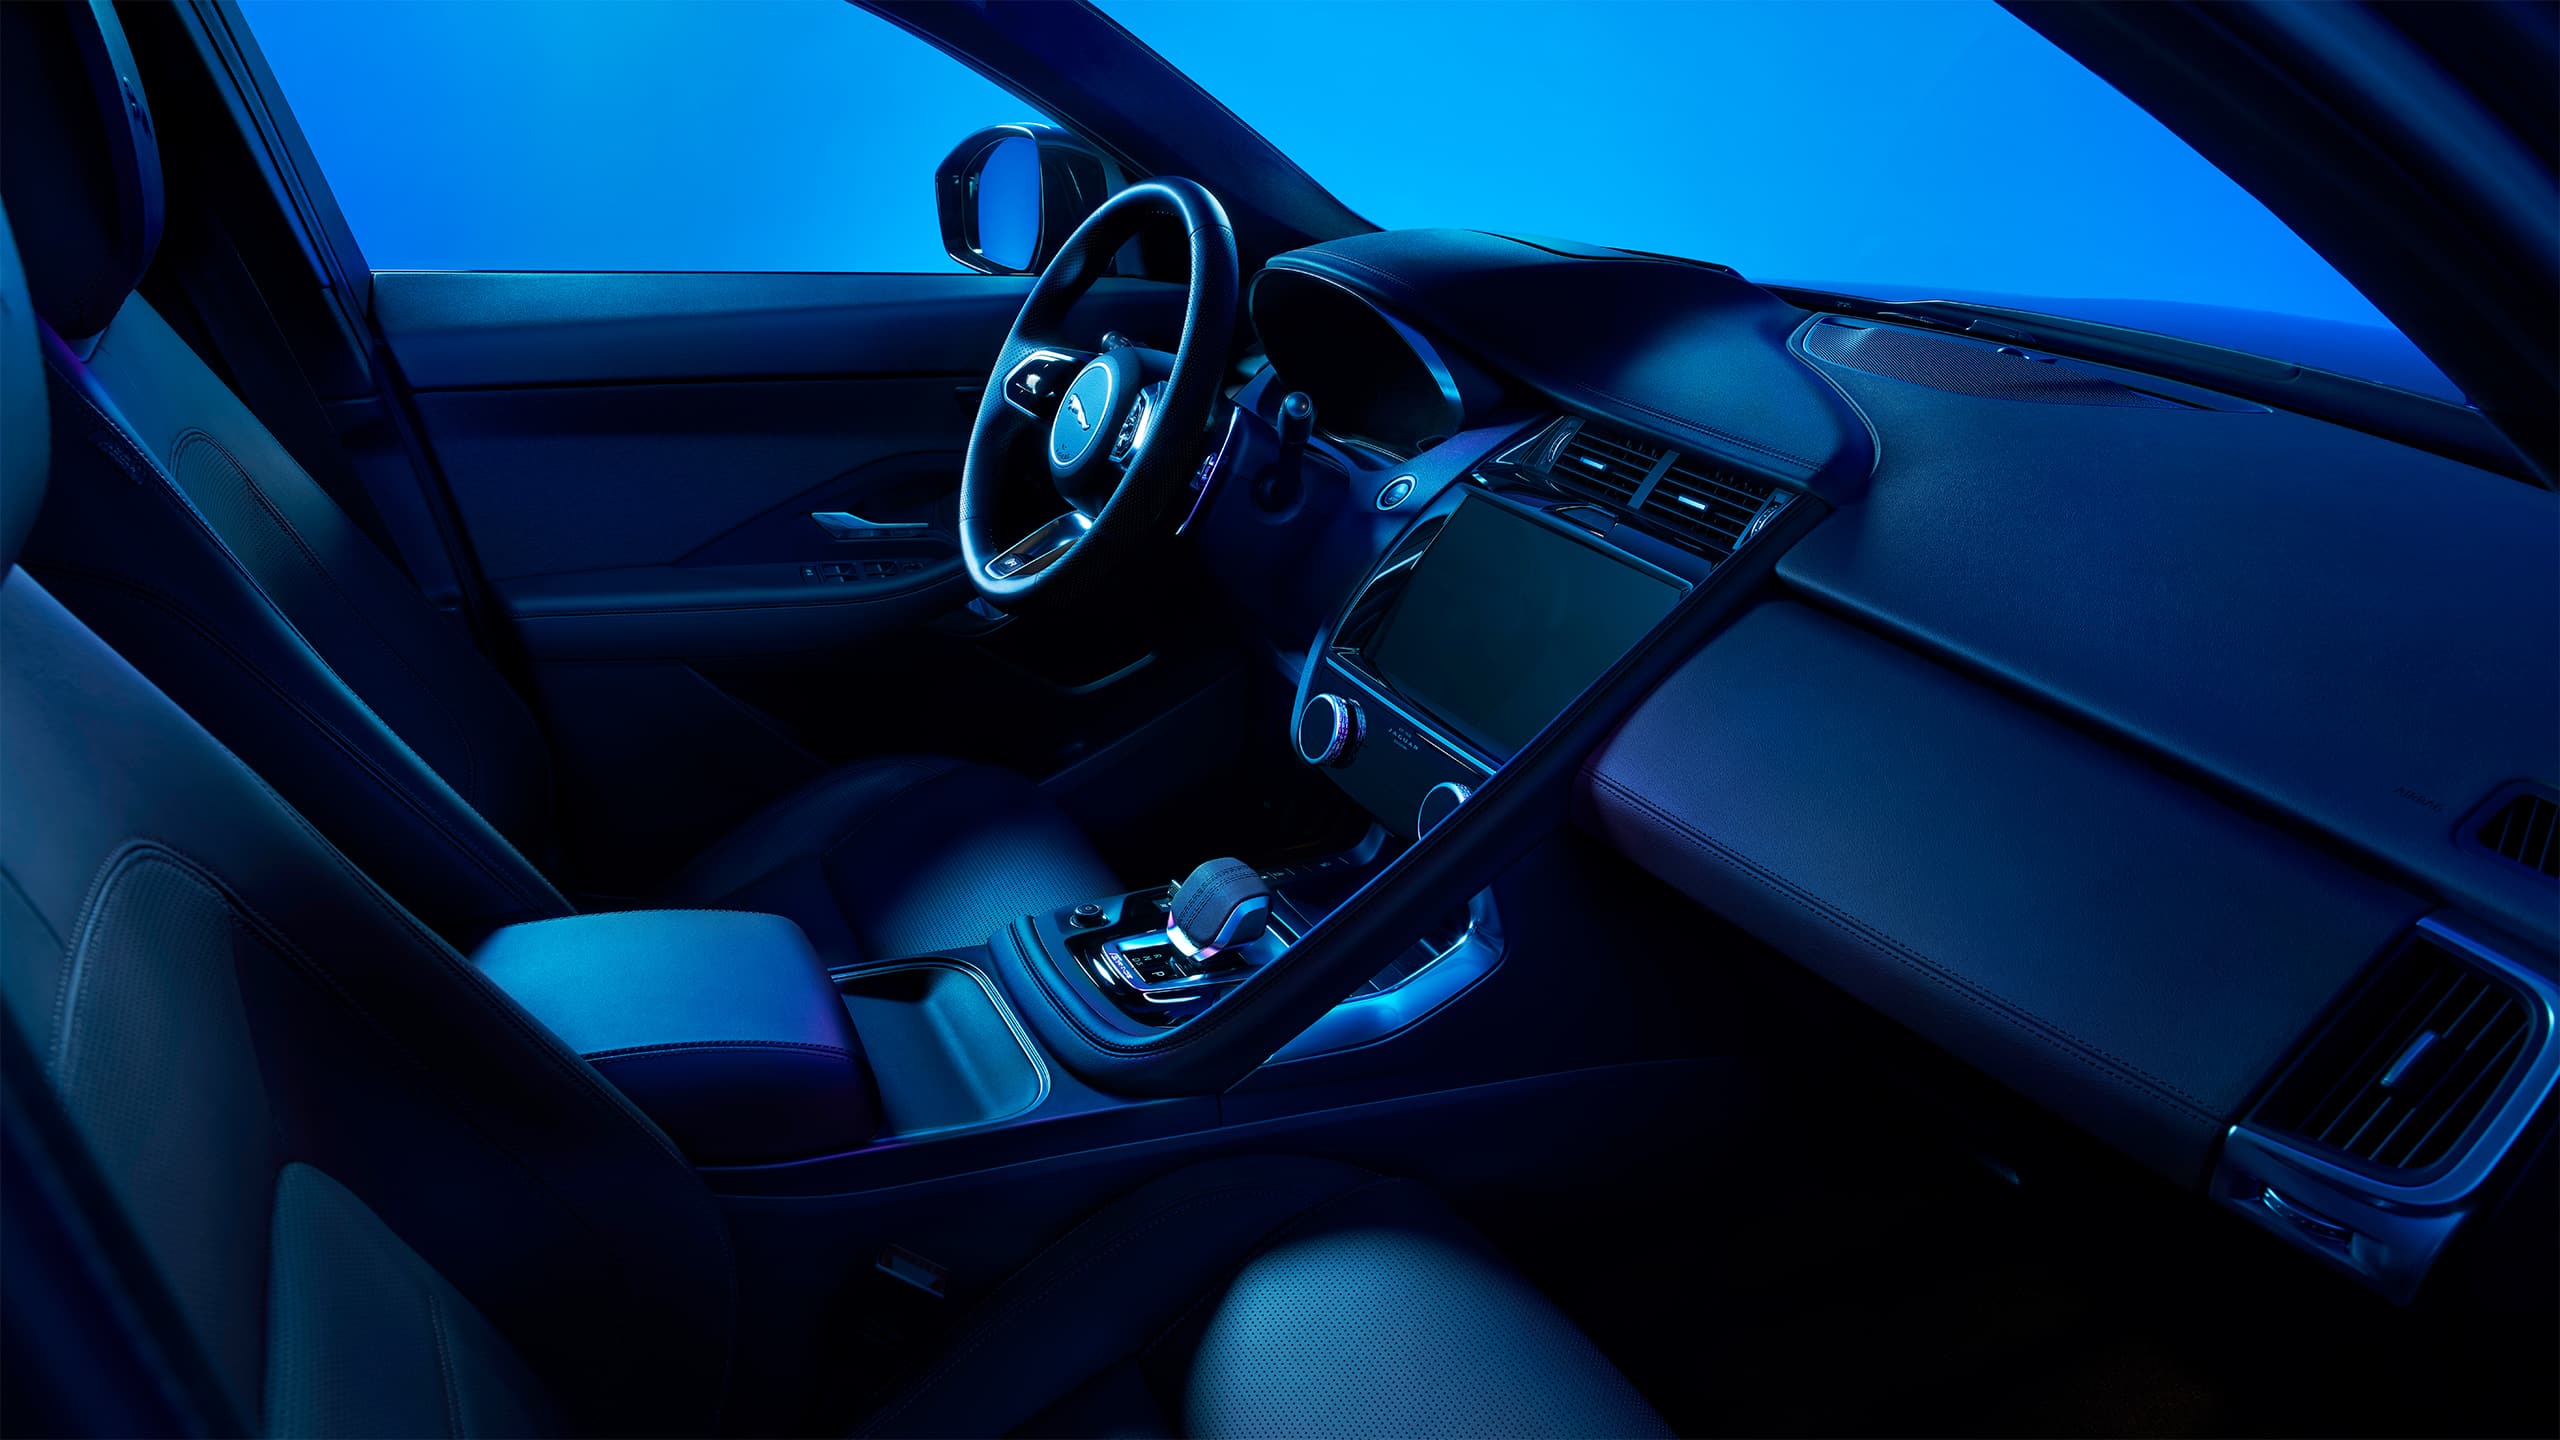 Jaguar E-Pace Interior view of the modern luxury car